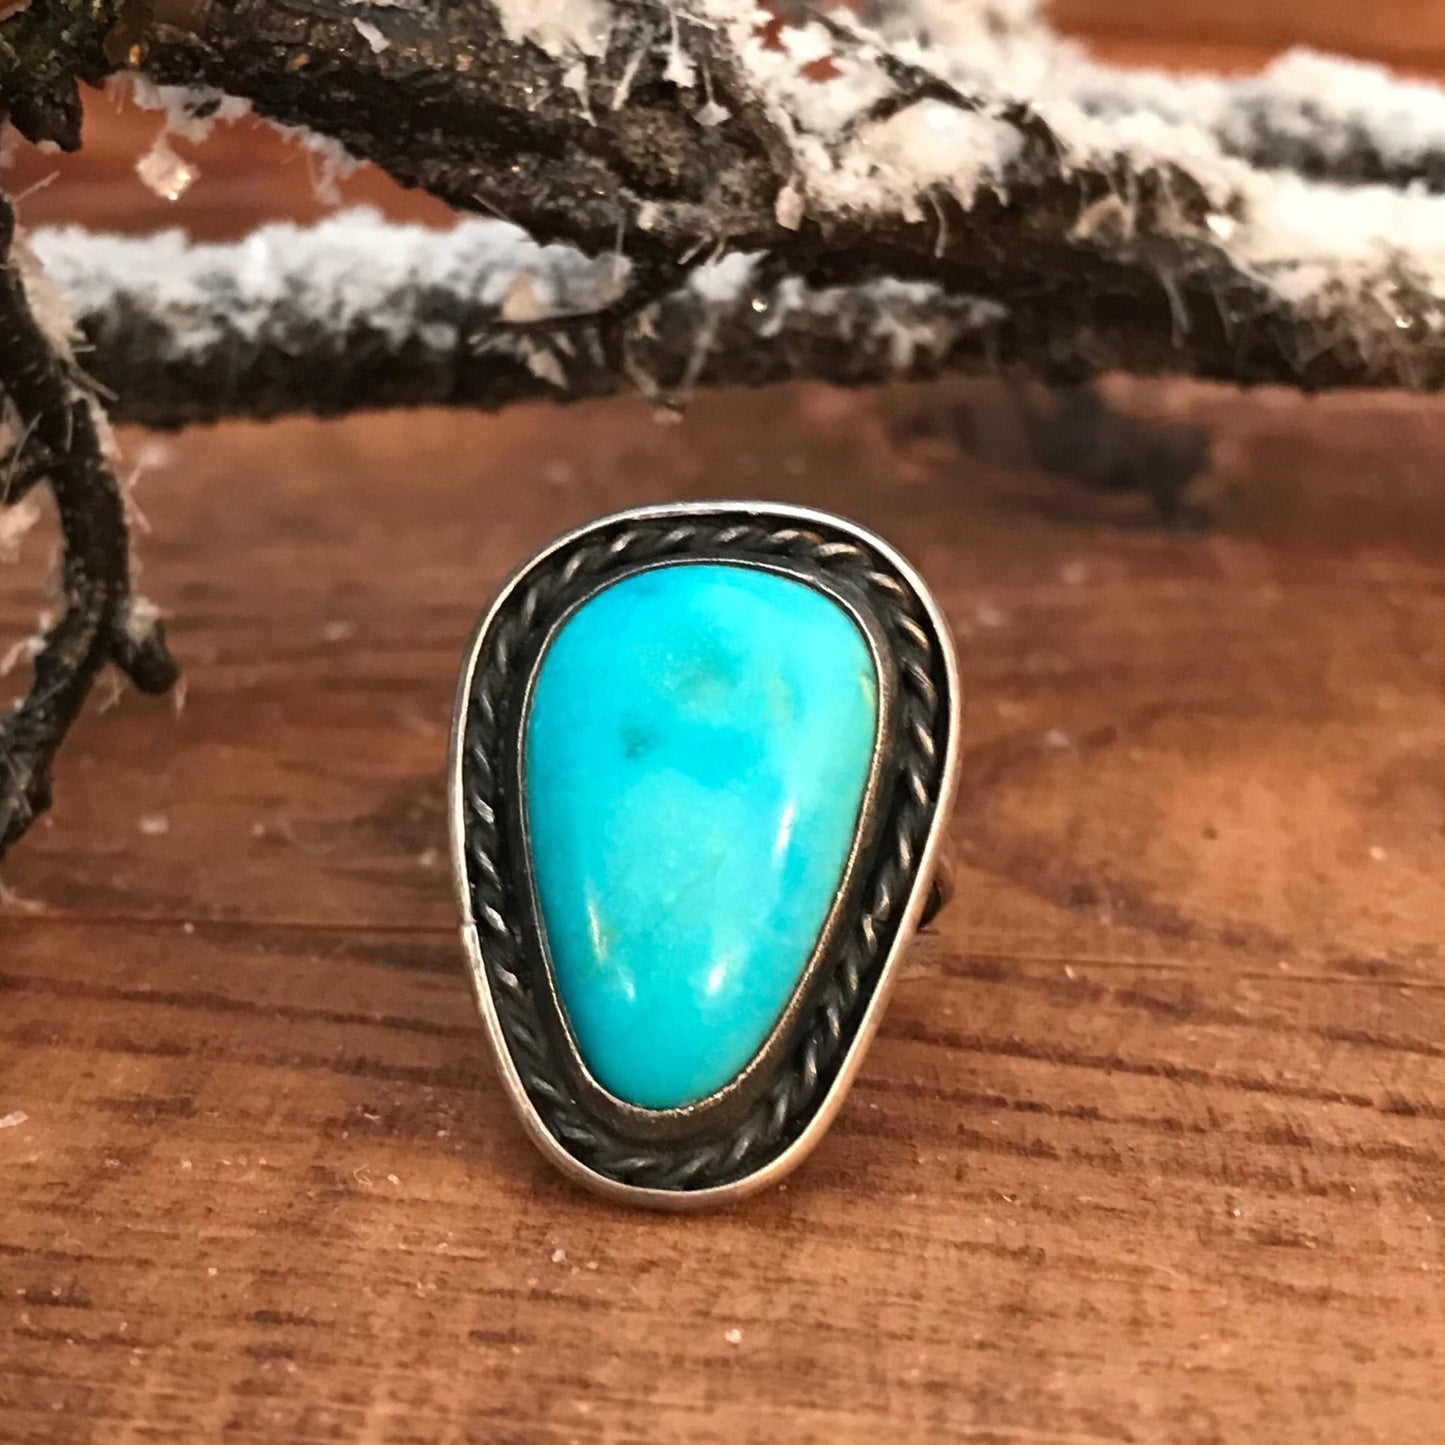 The Honky Tonk Turquoise Ring (size 8.5) - Ny Texas Style Boutique Classic Native American Made Sterling Silver Turquoise Ring Size 8.5Kingman turquoise single stone native made beautiful everyday ring. This ring will make a splash in any jewelry collection.   Size: 1.25” inches length   Ring Size: 8.5  Stone: Kingman Turquoise 